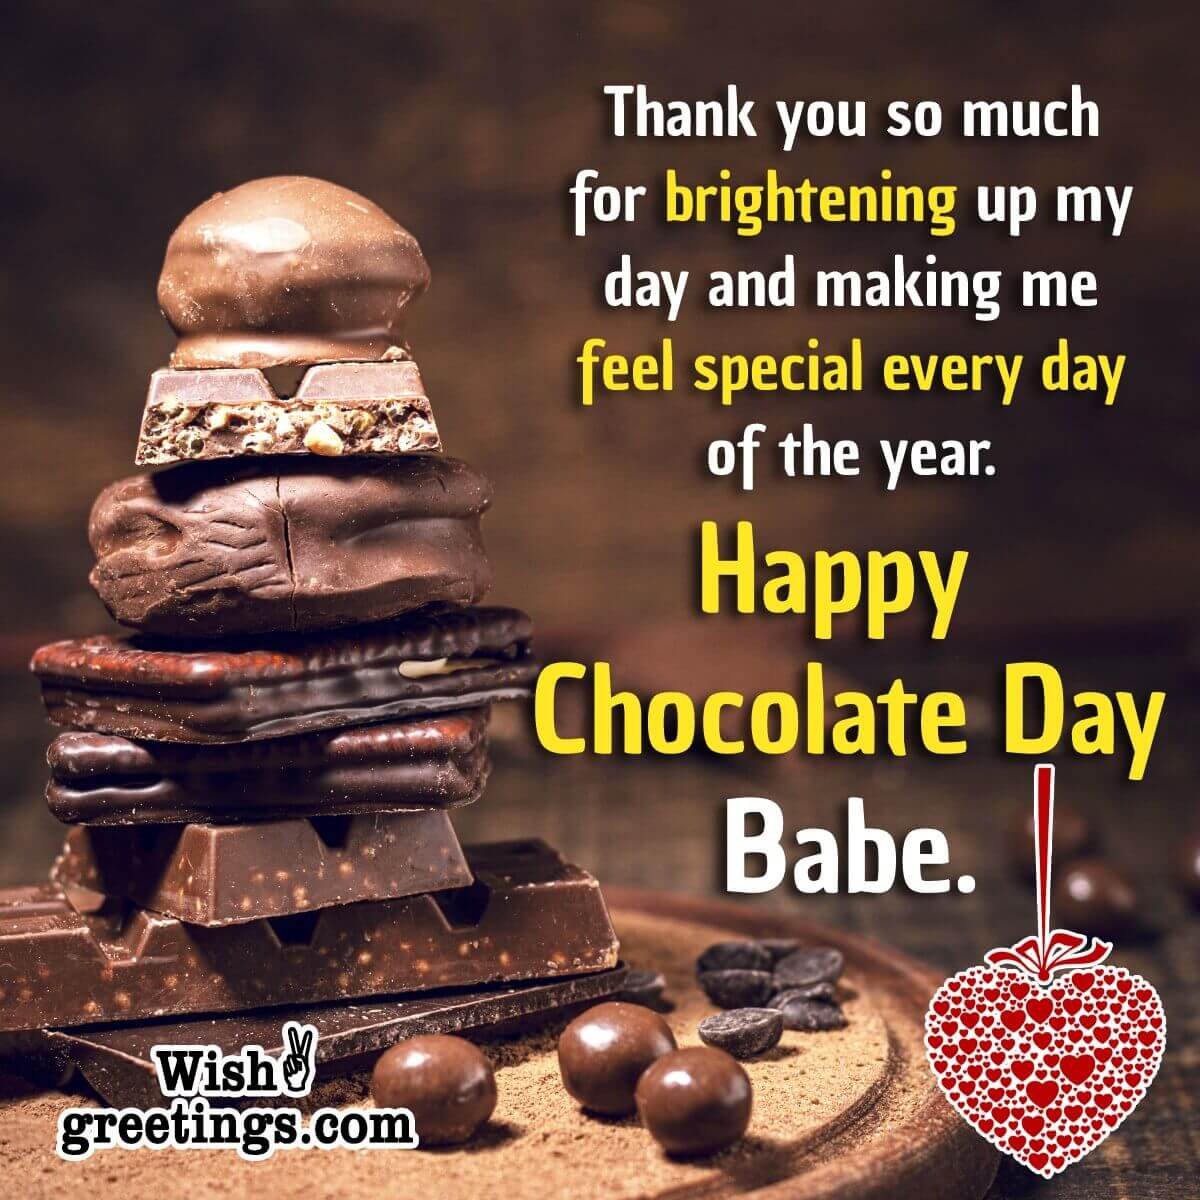 Happy Chocolate Day Wish Image For Babe